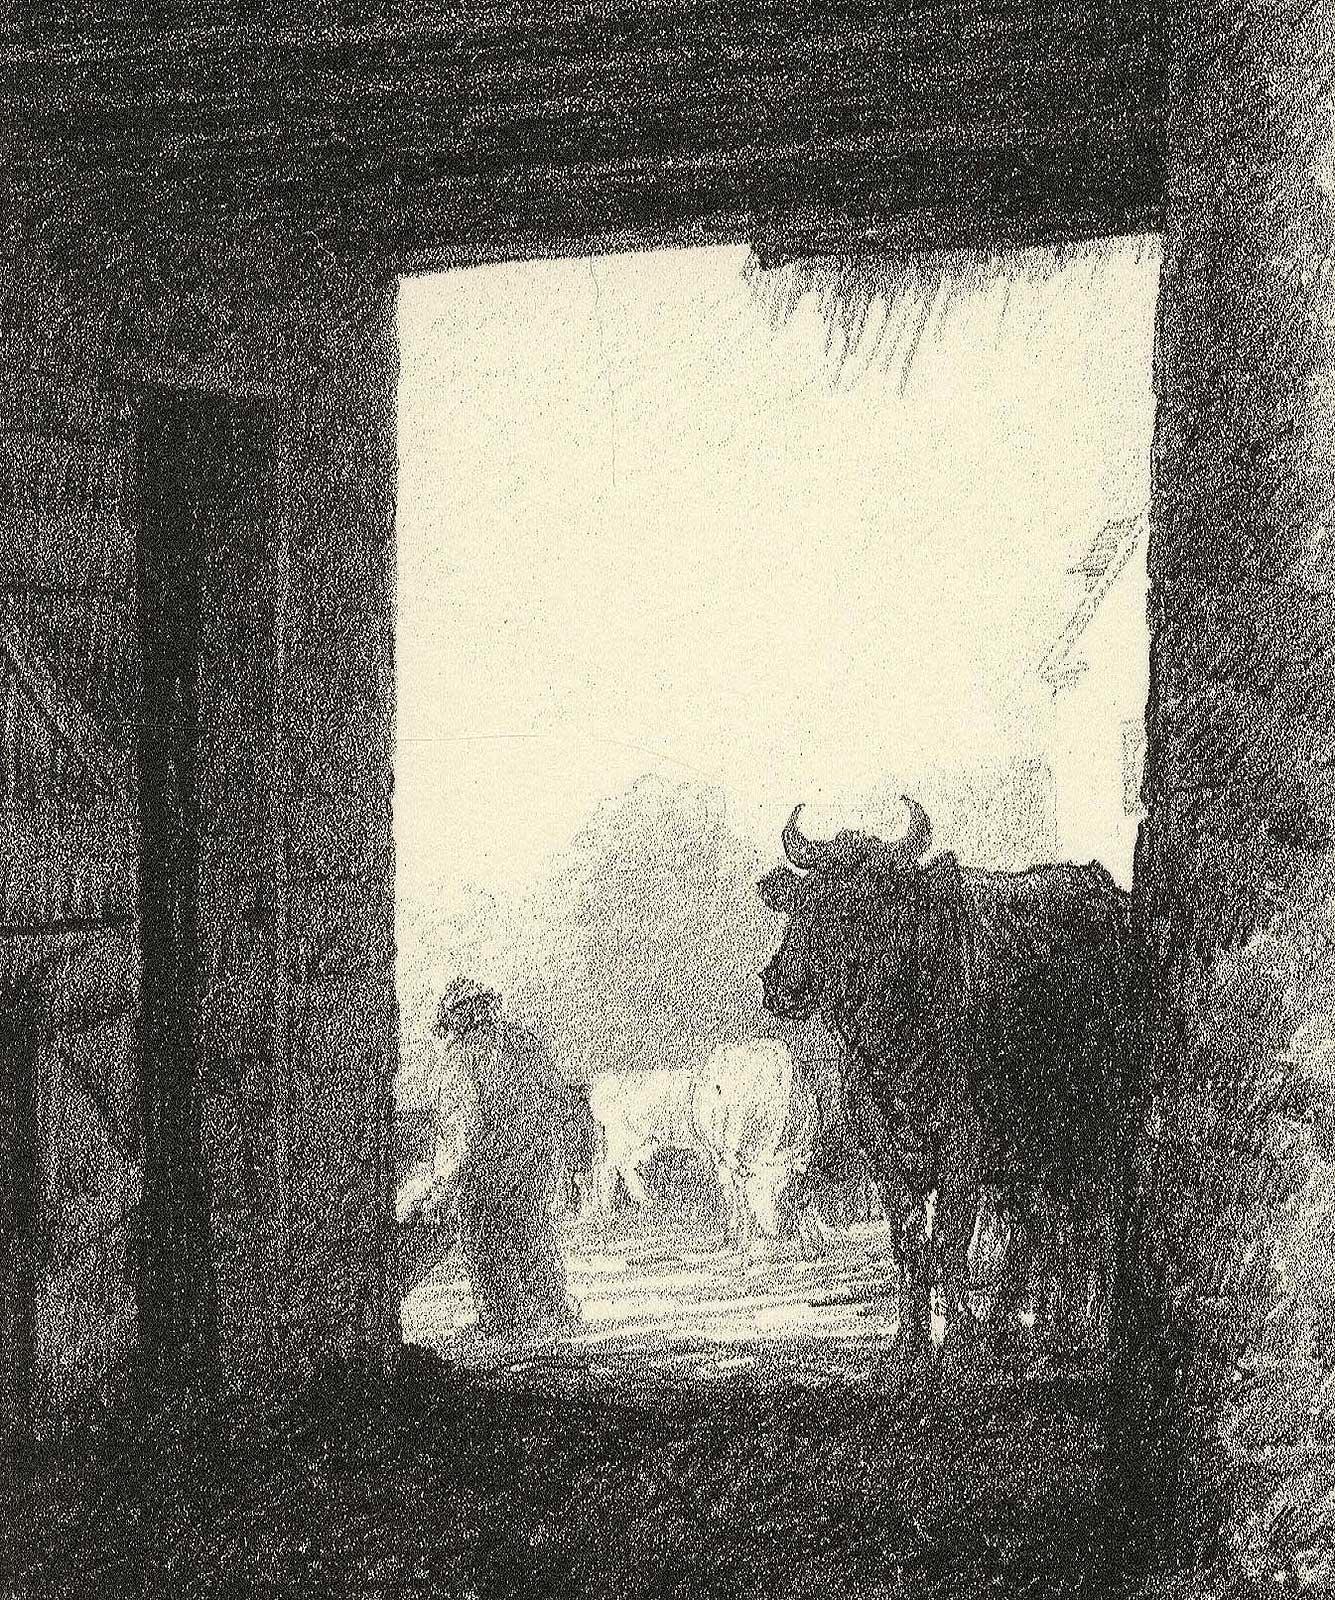 The Barn (a romantic look at the rural landscape of an earlier American era) - Print by Albert Winslow Barker